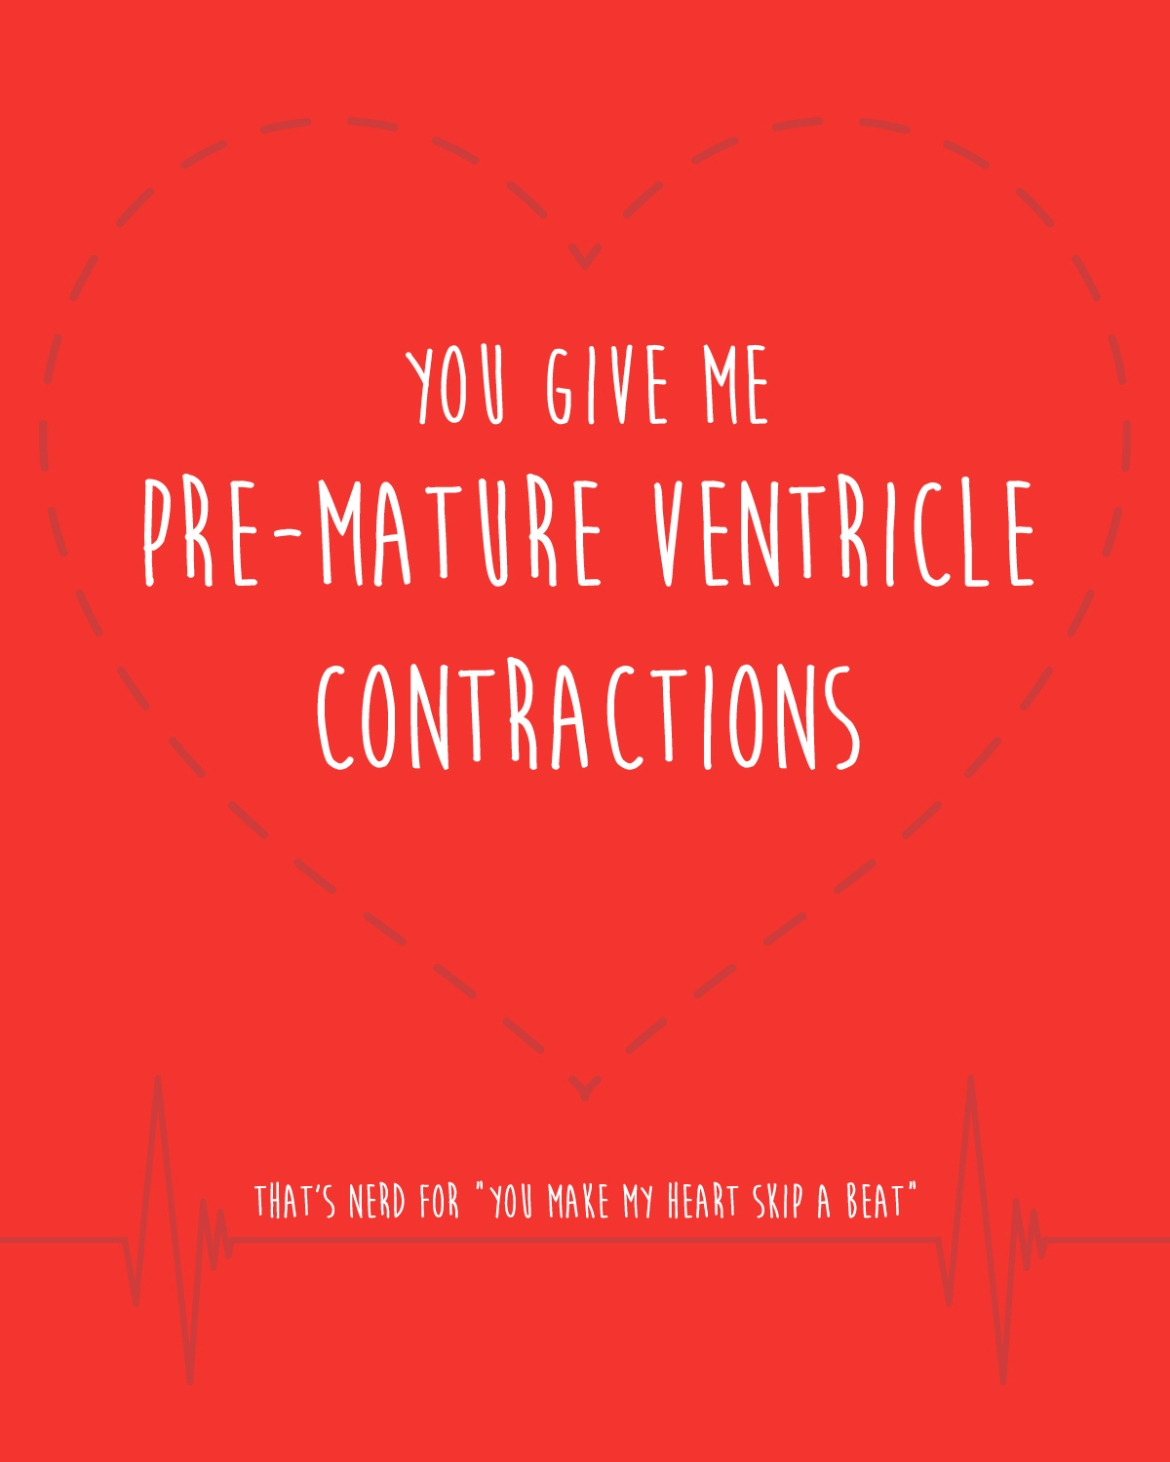 you give me pre-mature ventricle contractions